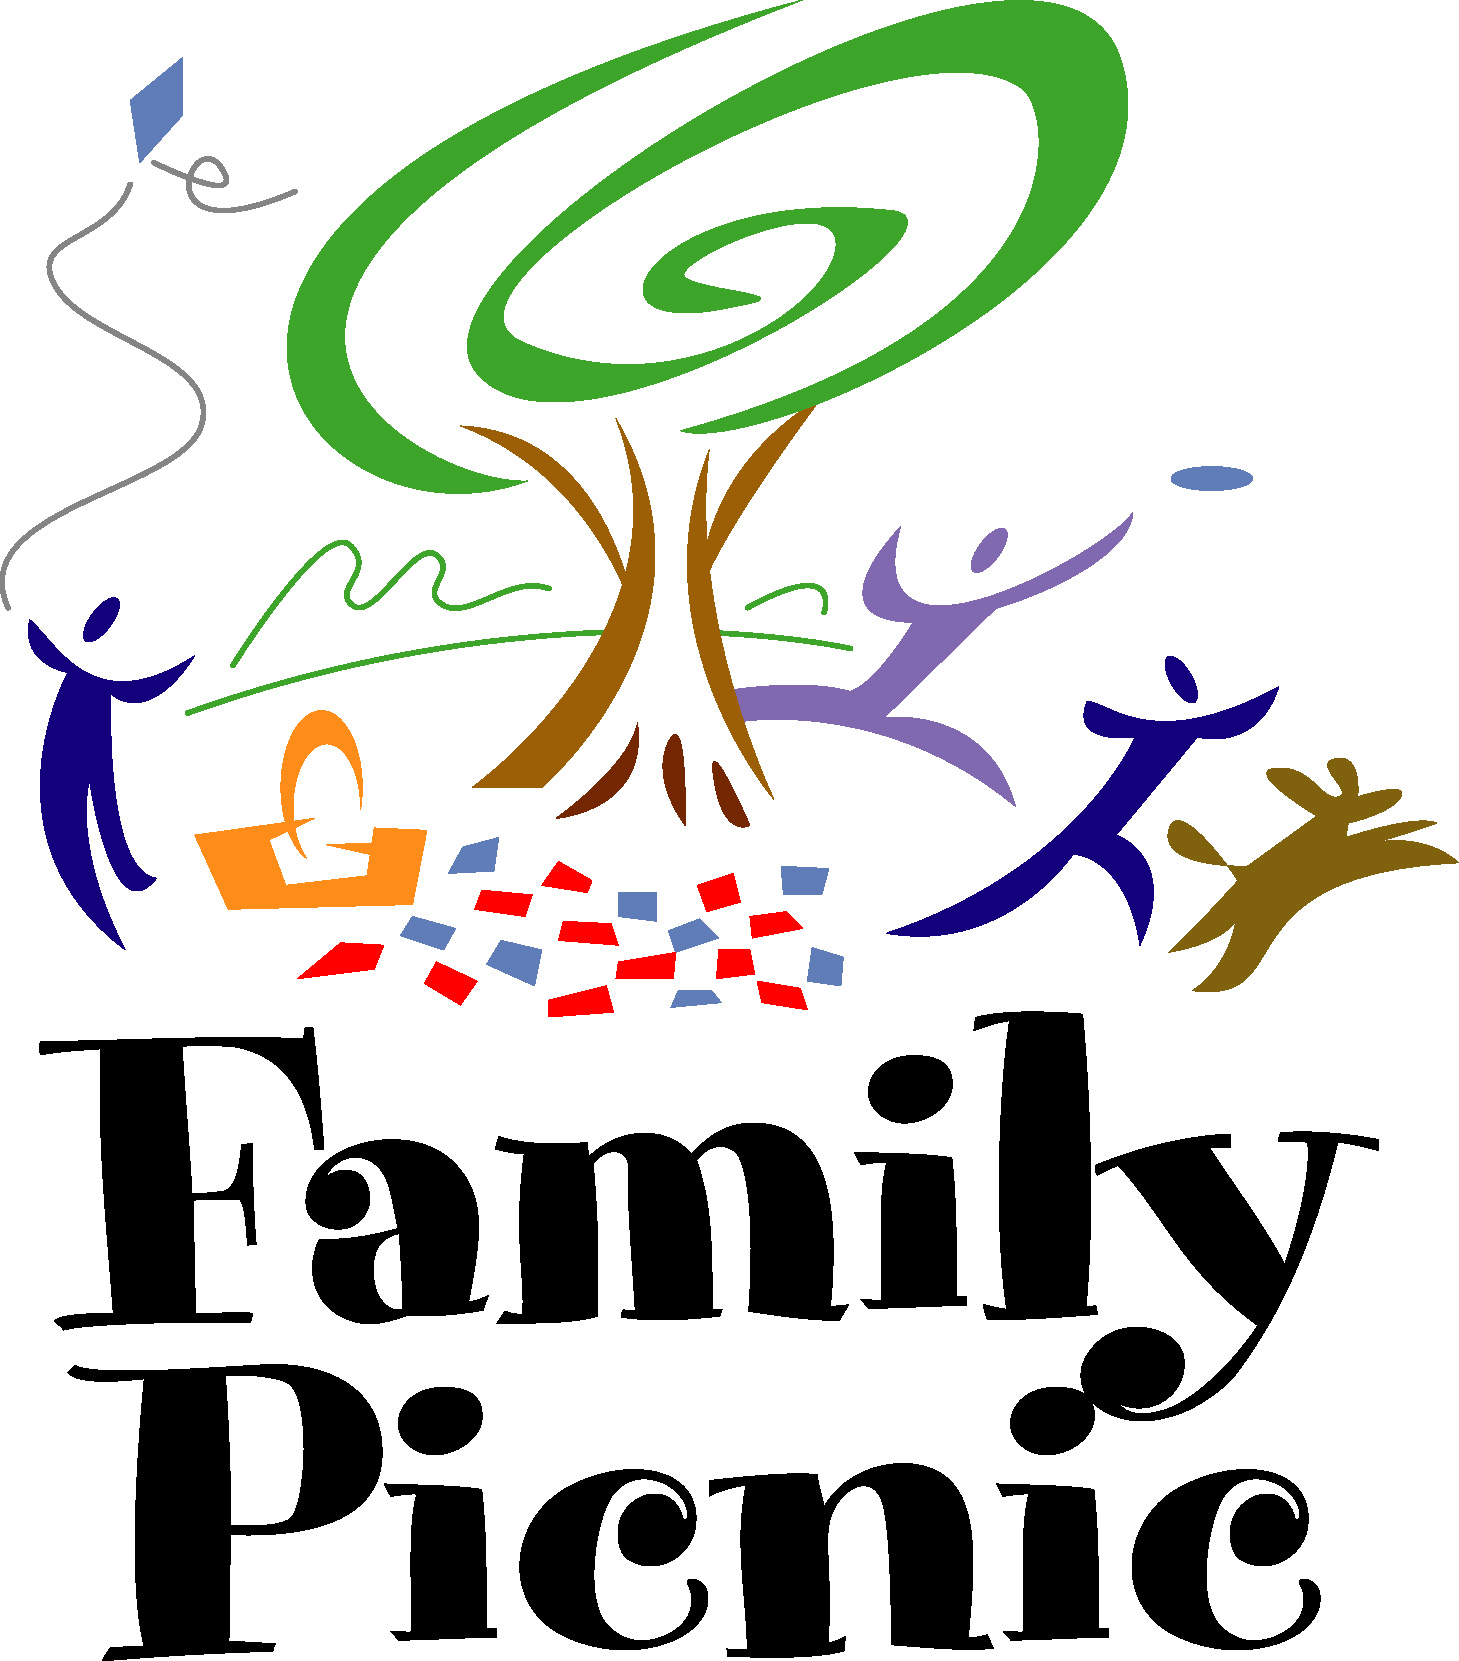 Picnic Clip Art Black And White | Clipart Panda - Free Clipart Images